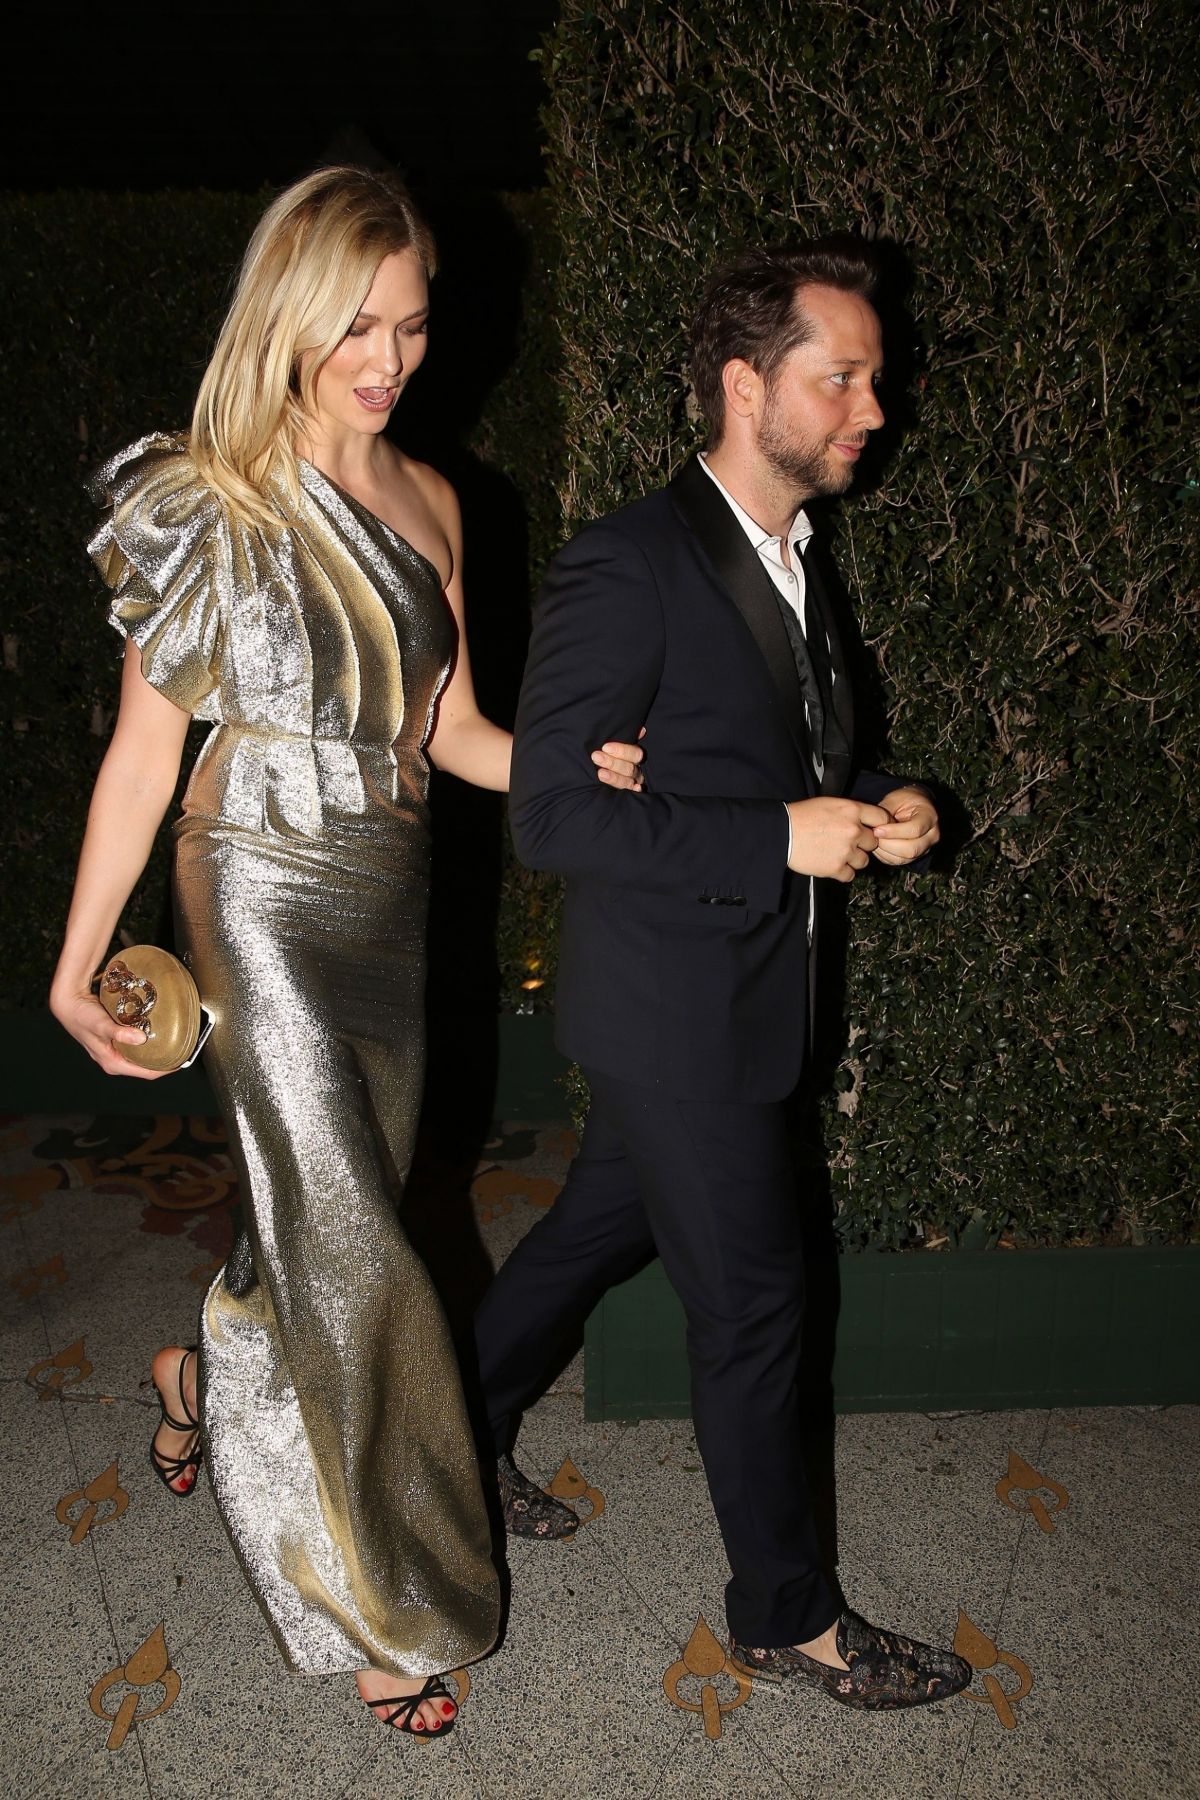 KARLIE KLOSS at Gwyneth Paltrow and Brad Falchuk’s Engagement Party in Los Angeles ...